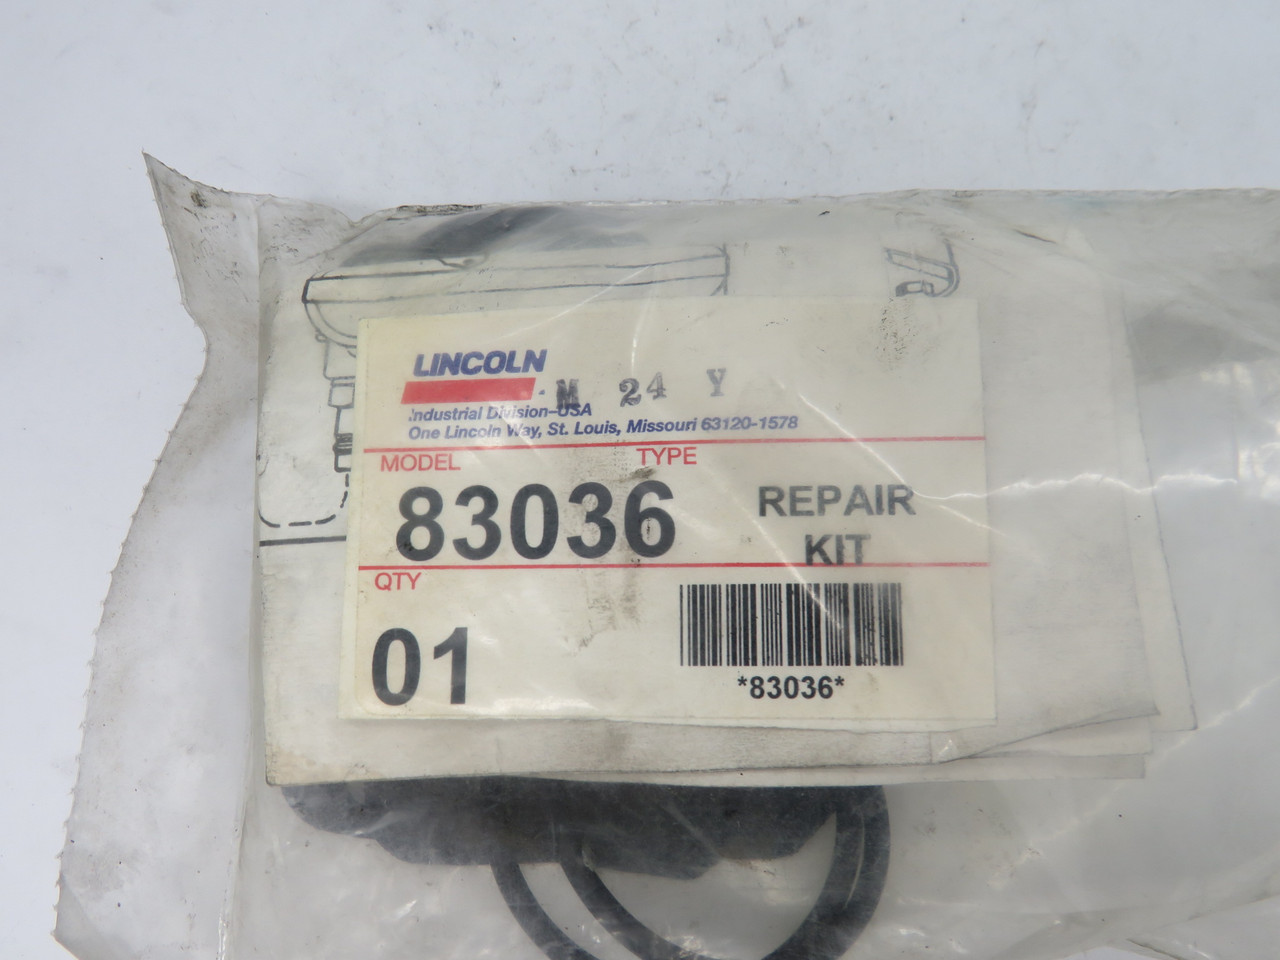 Lincoln 83036 Repair Kit For Power-Master Air Motors *Missing Pieces* NWB